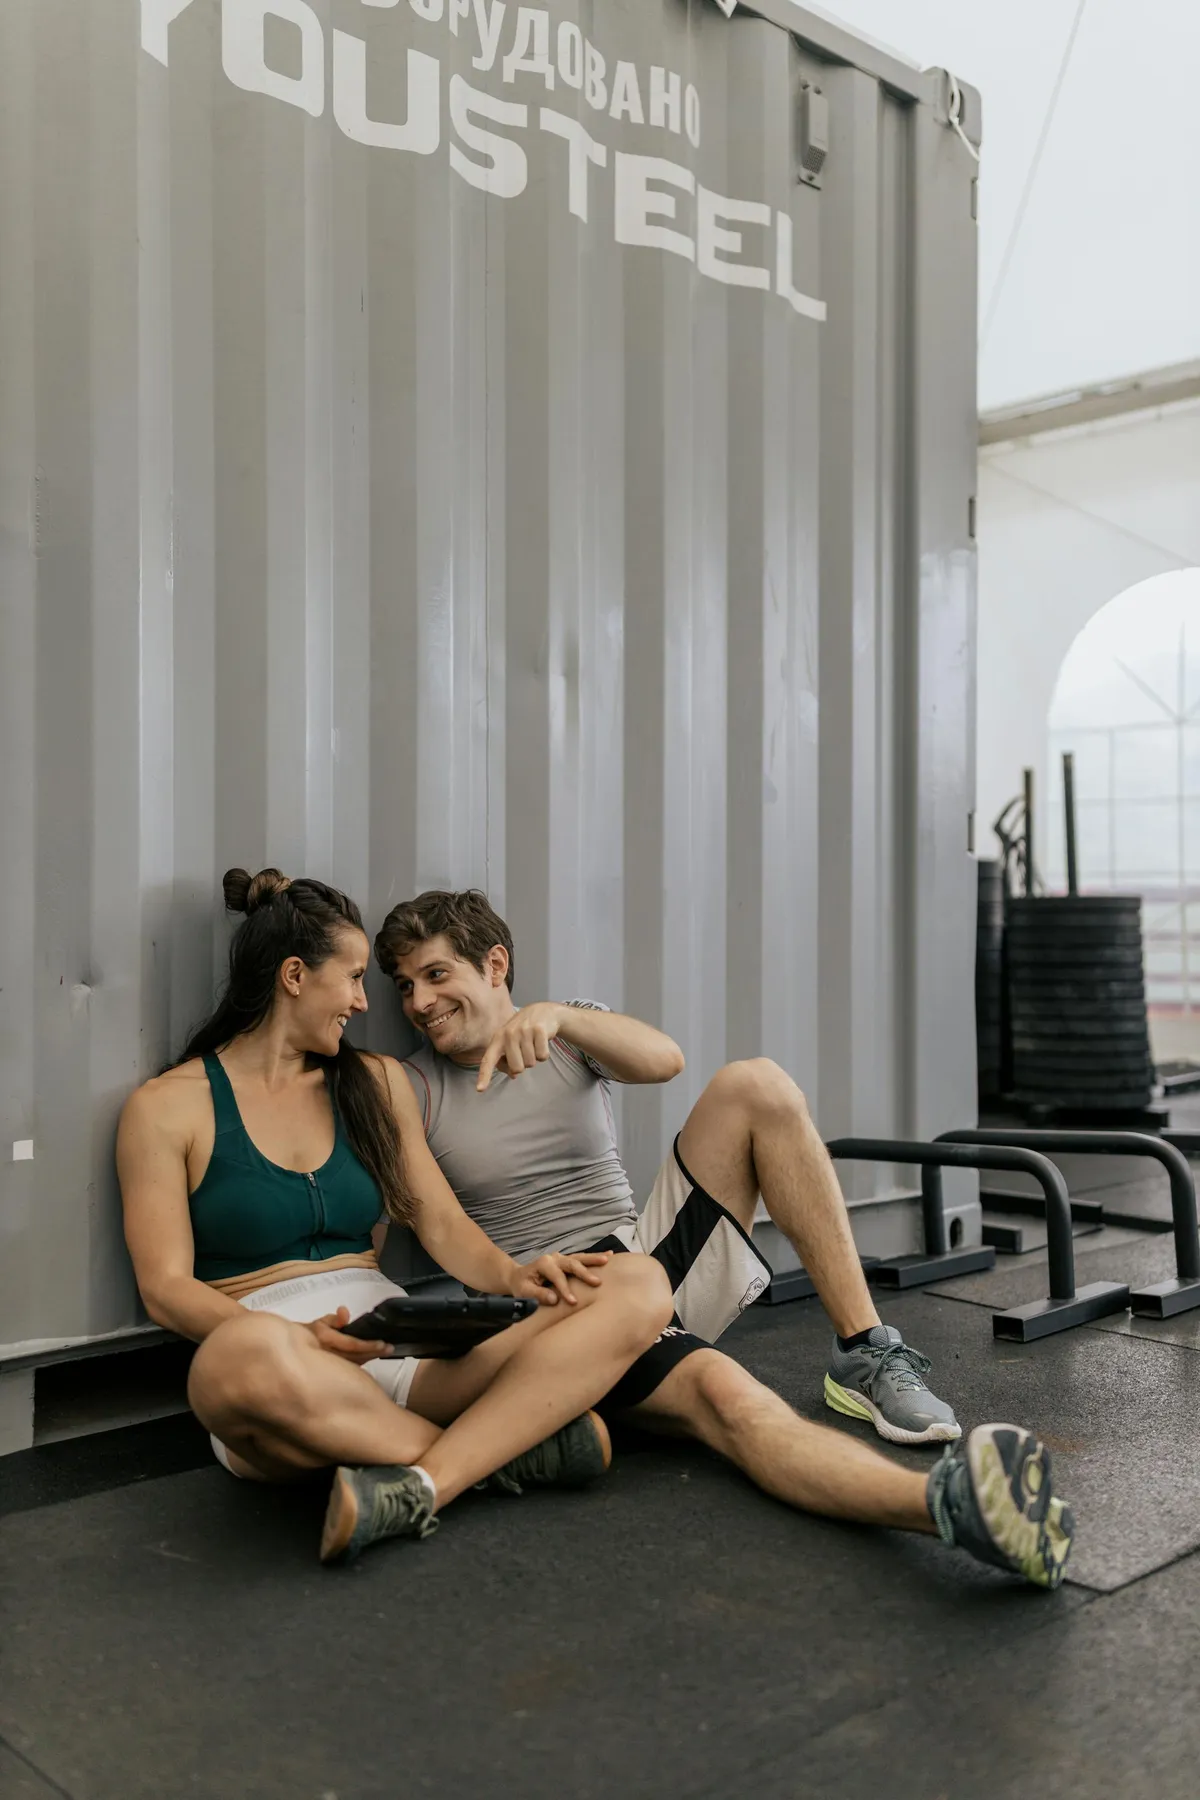 A couple in athletic gear sitting on the floor and chatting | Source: Pexels